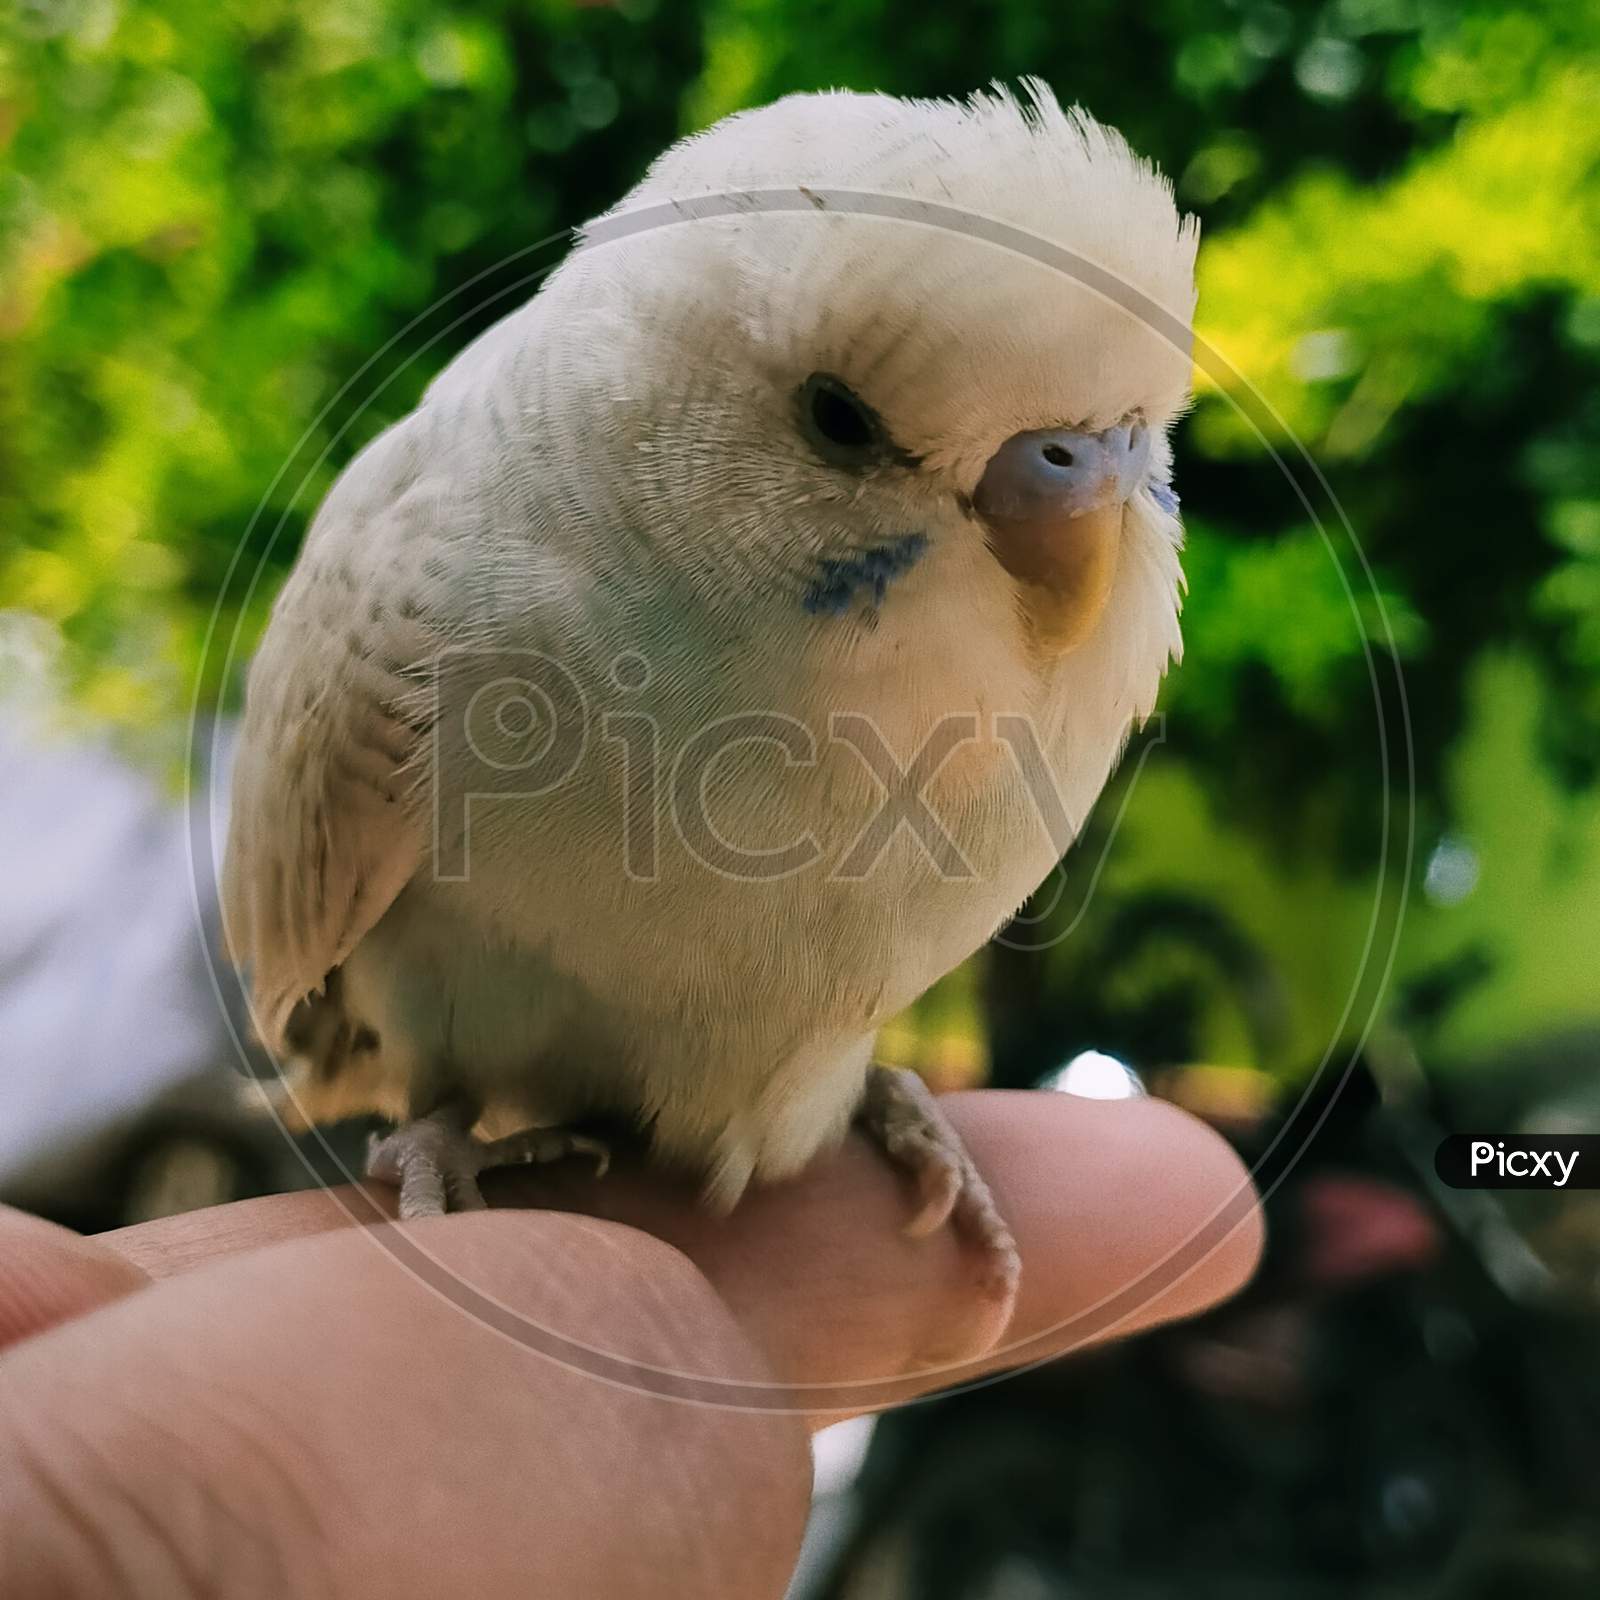 Love bird on hand love is in our hand you can share or you can destroy yourself